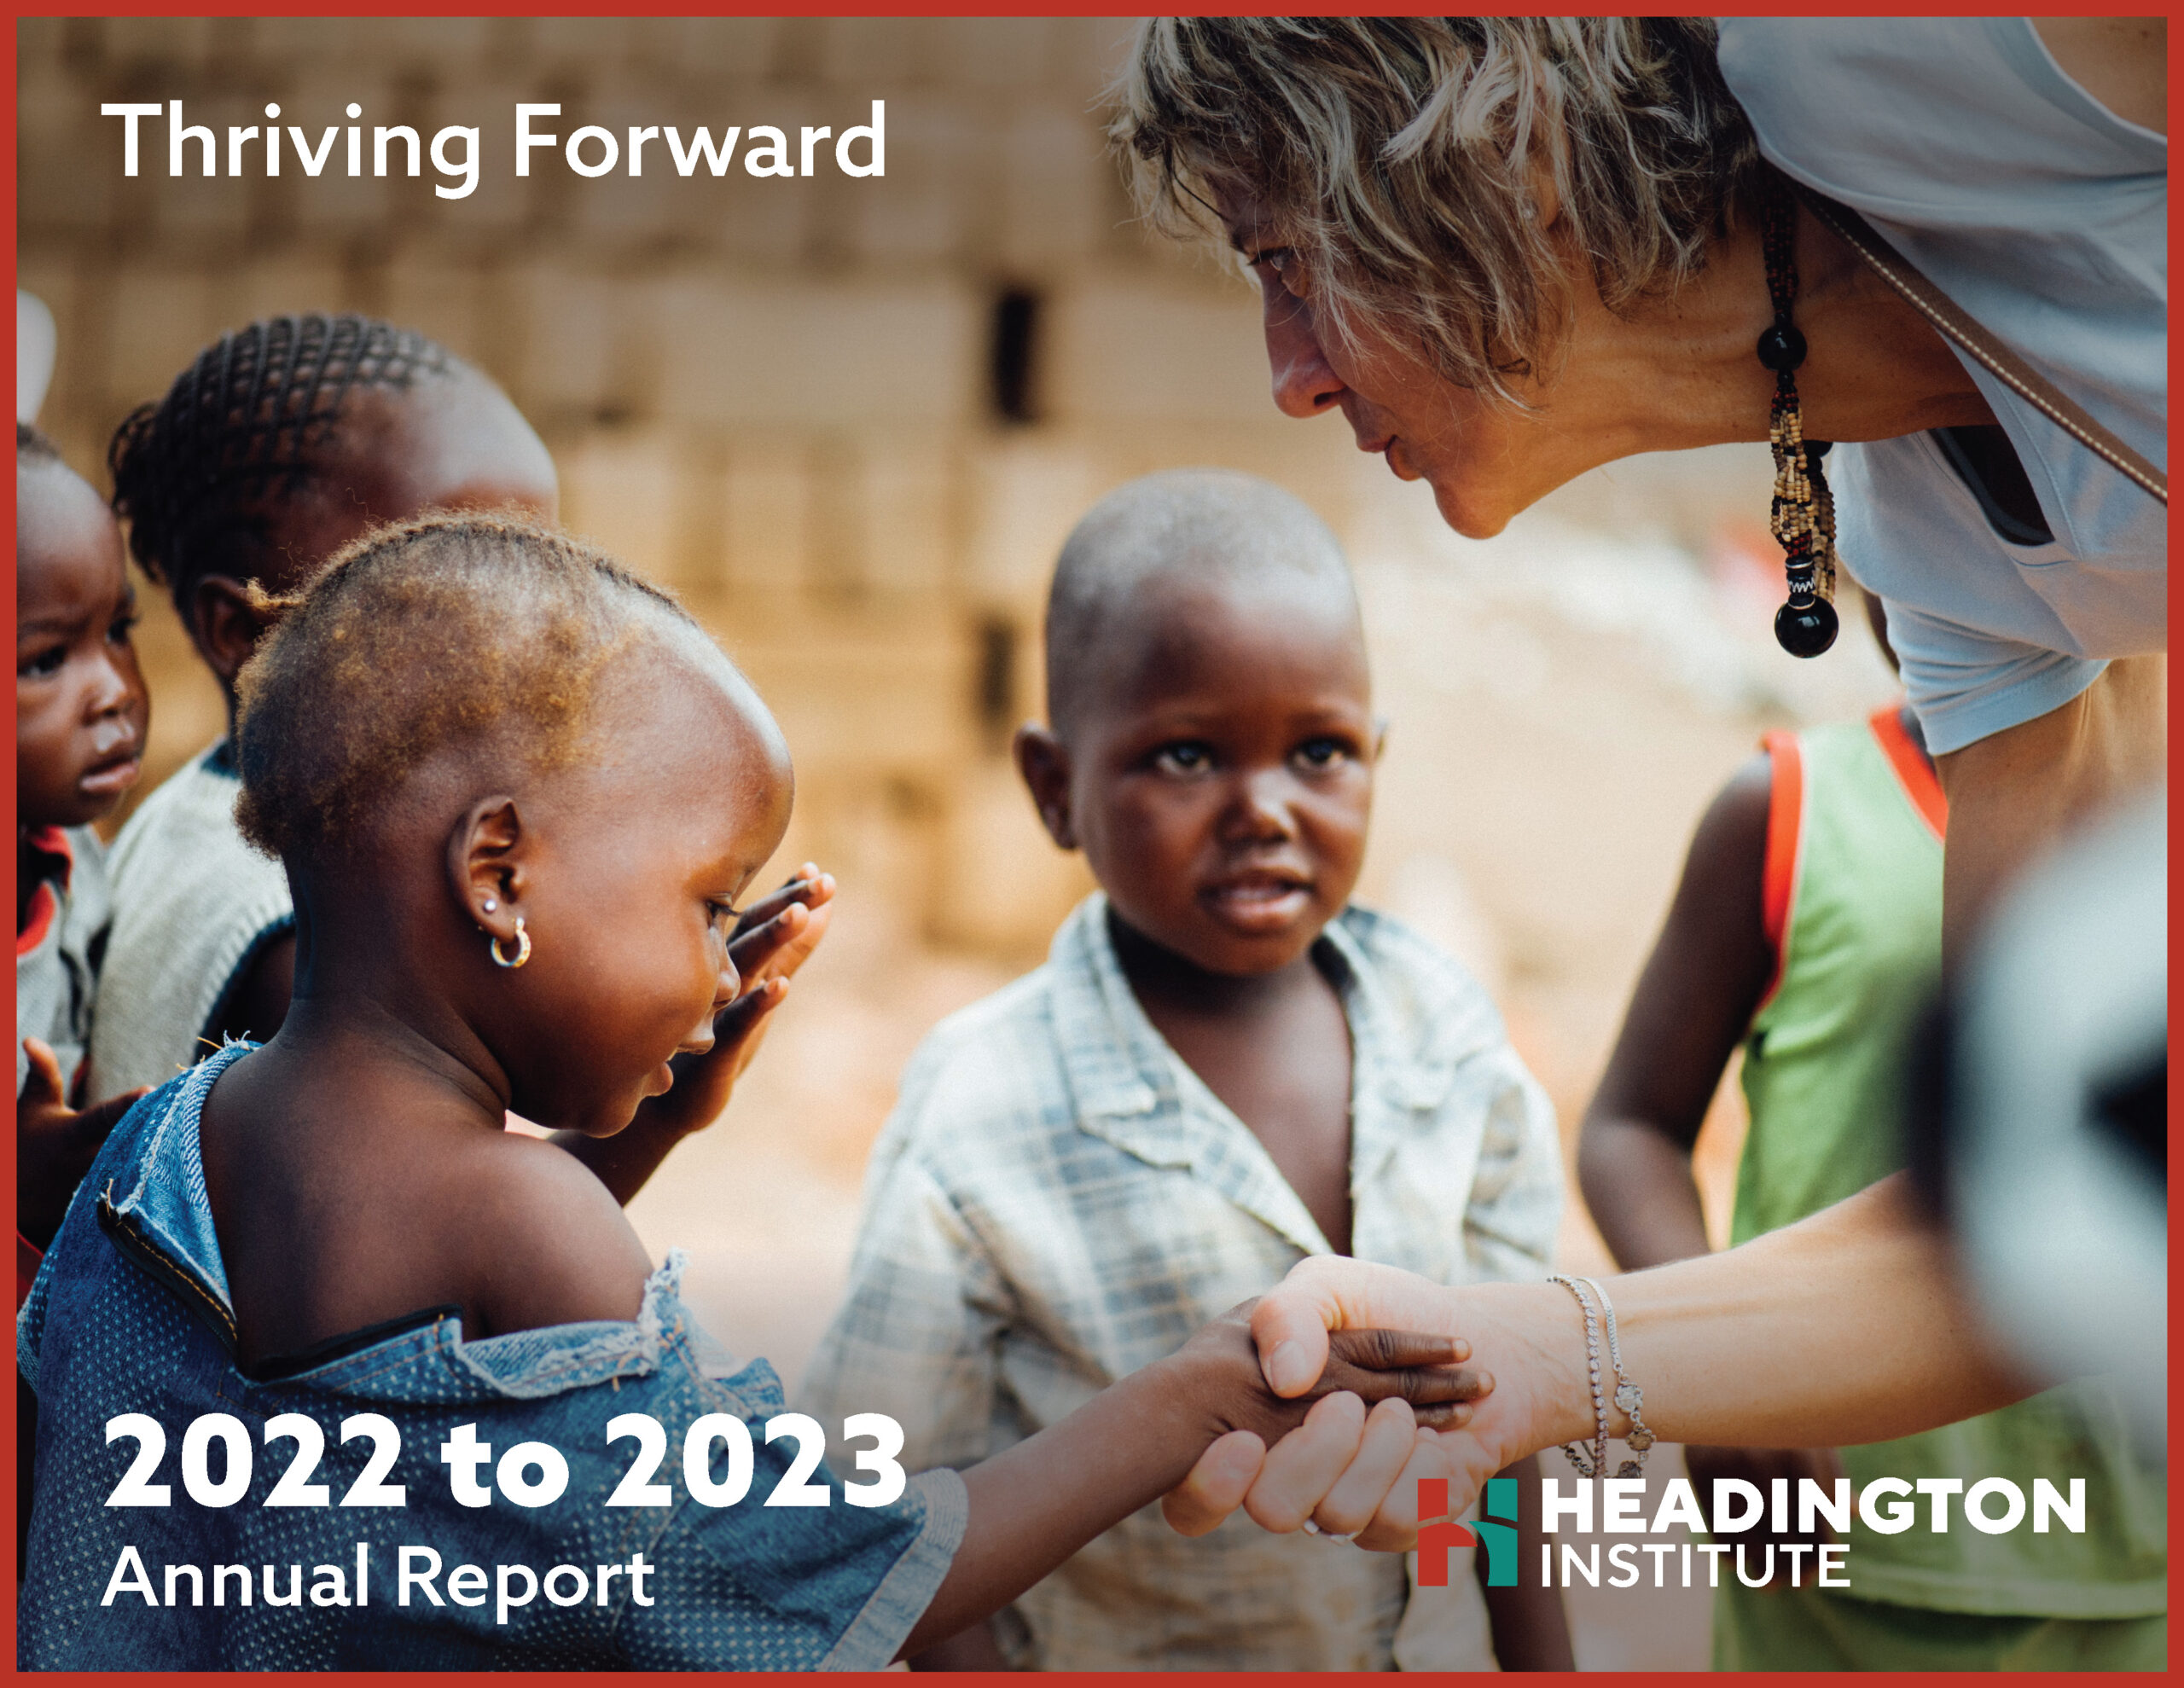 Thriving Forward: Our Latest Annual Report